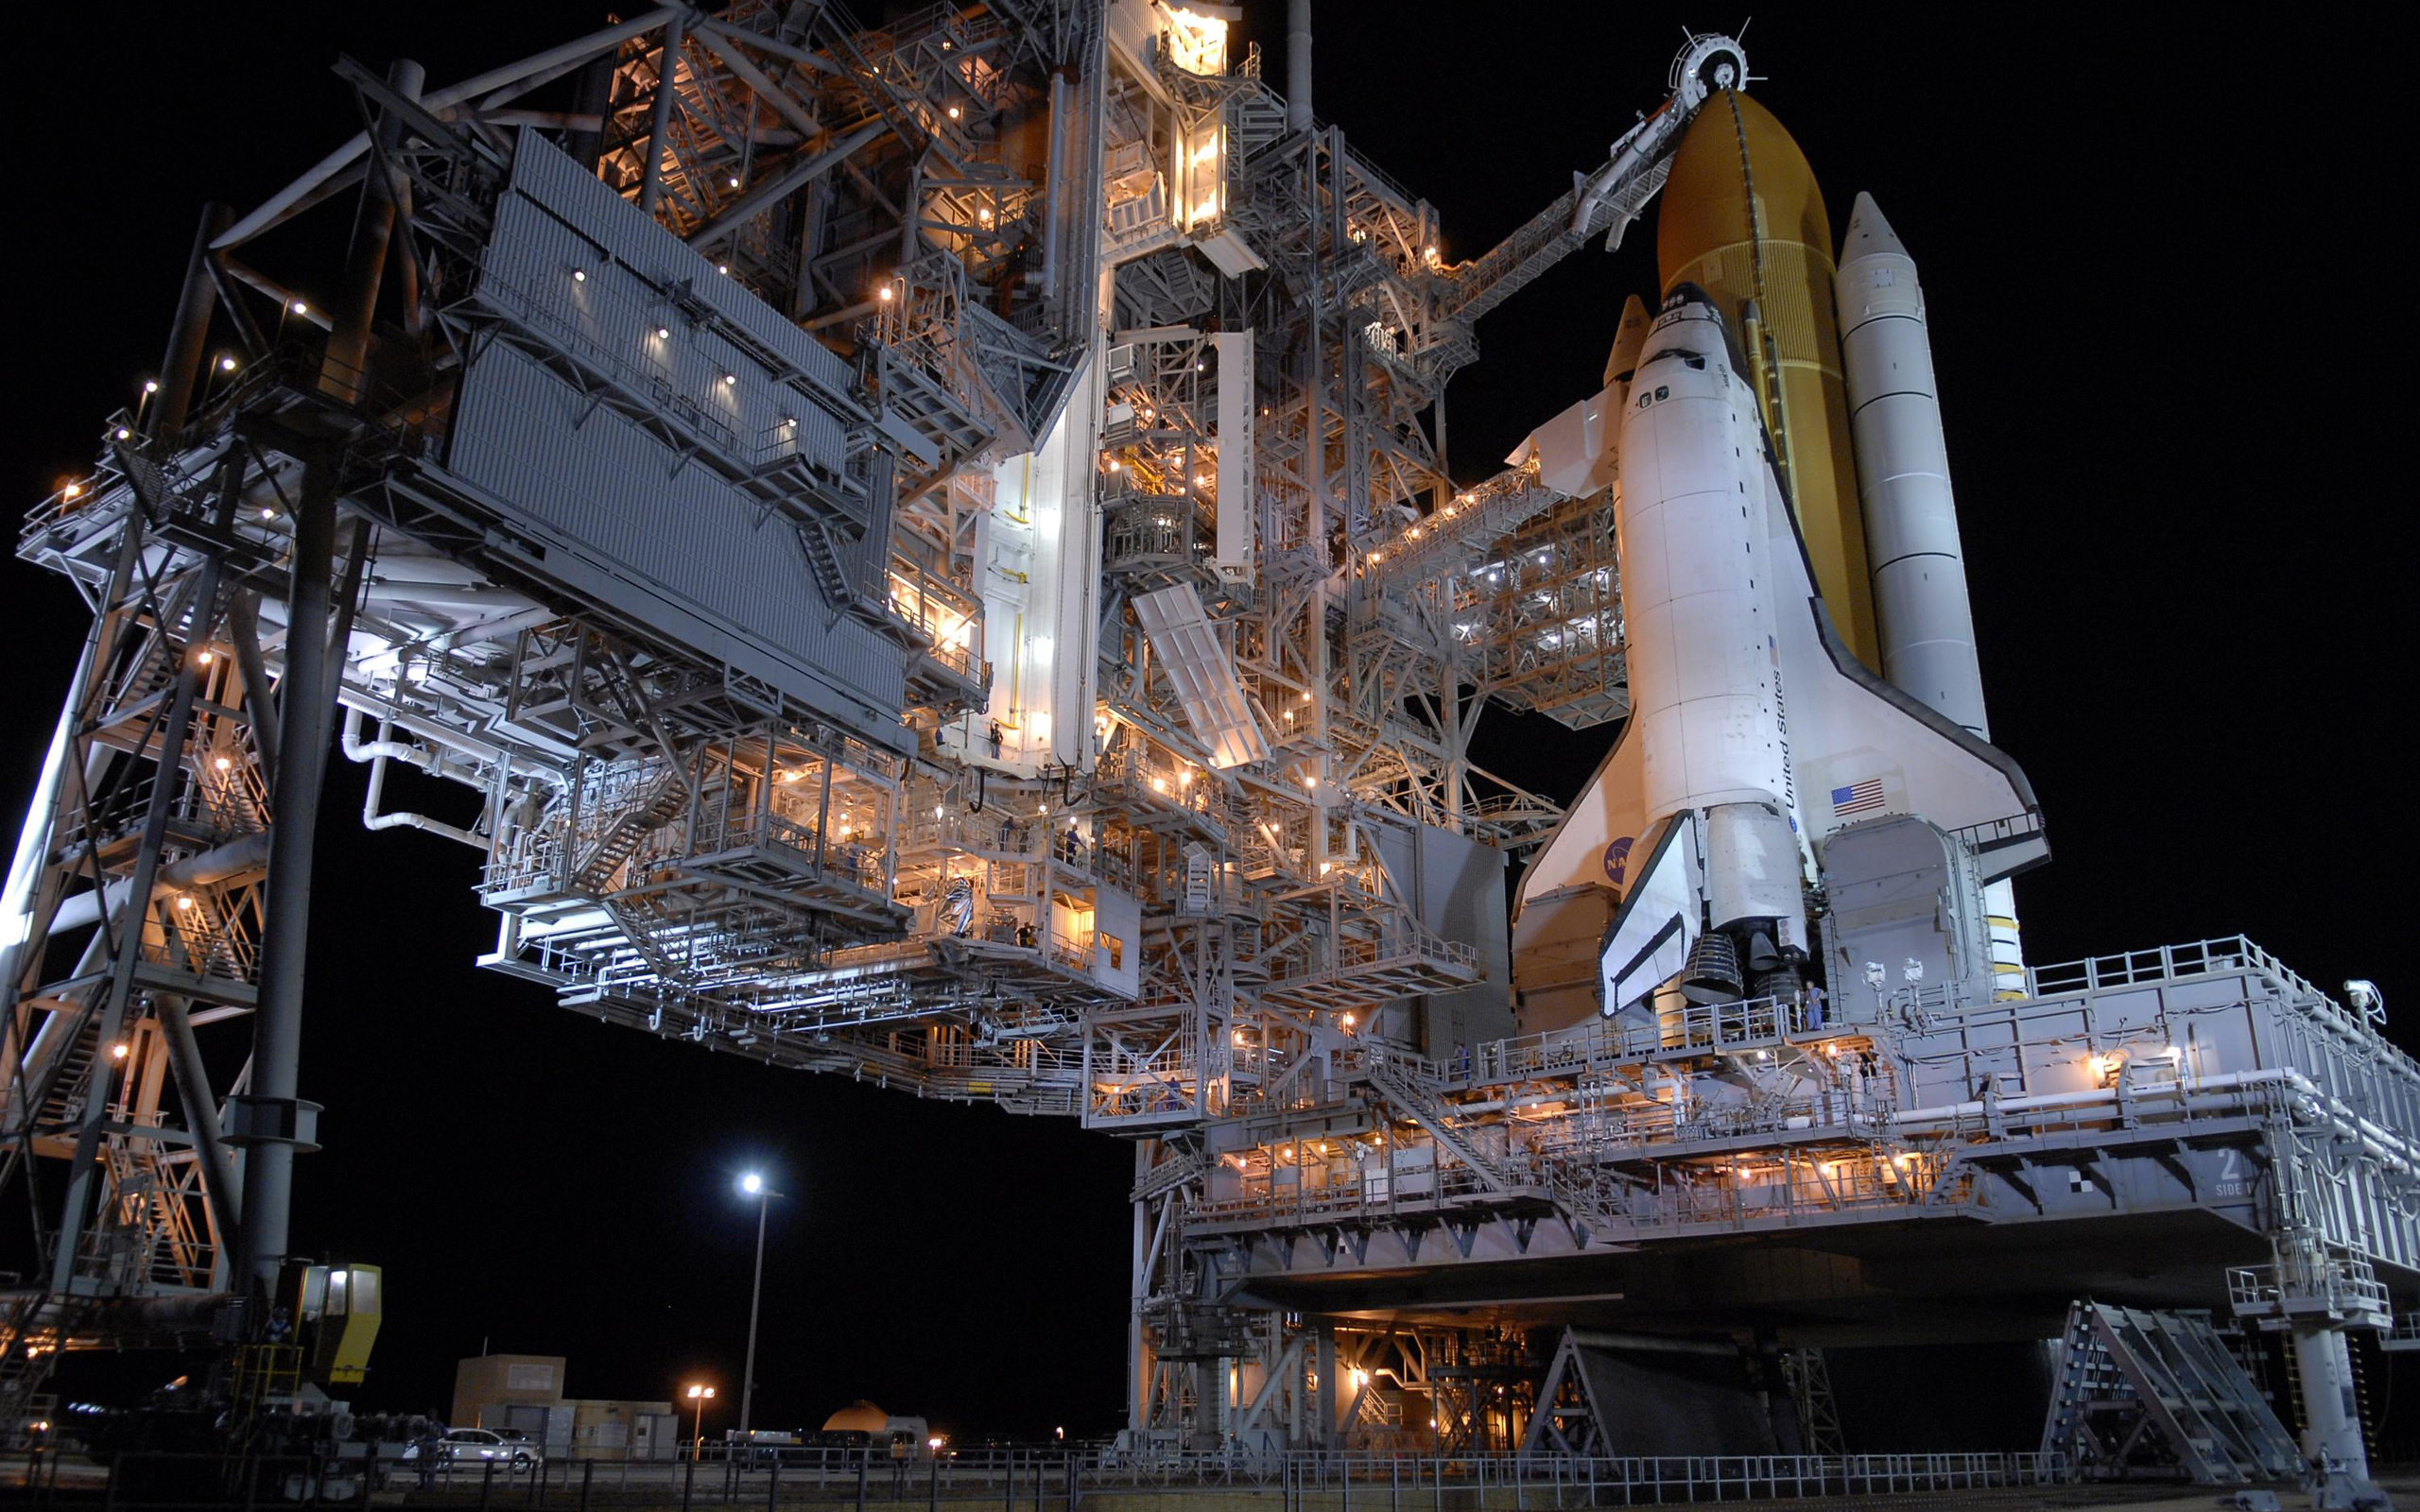 Space Shuttle Desktop Wallpaper For HD Widescreen And Mobile